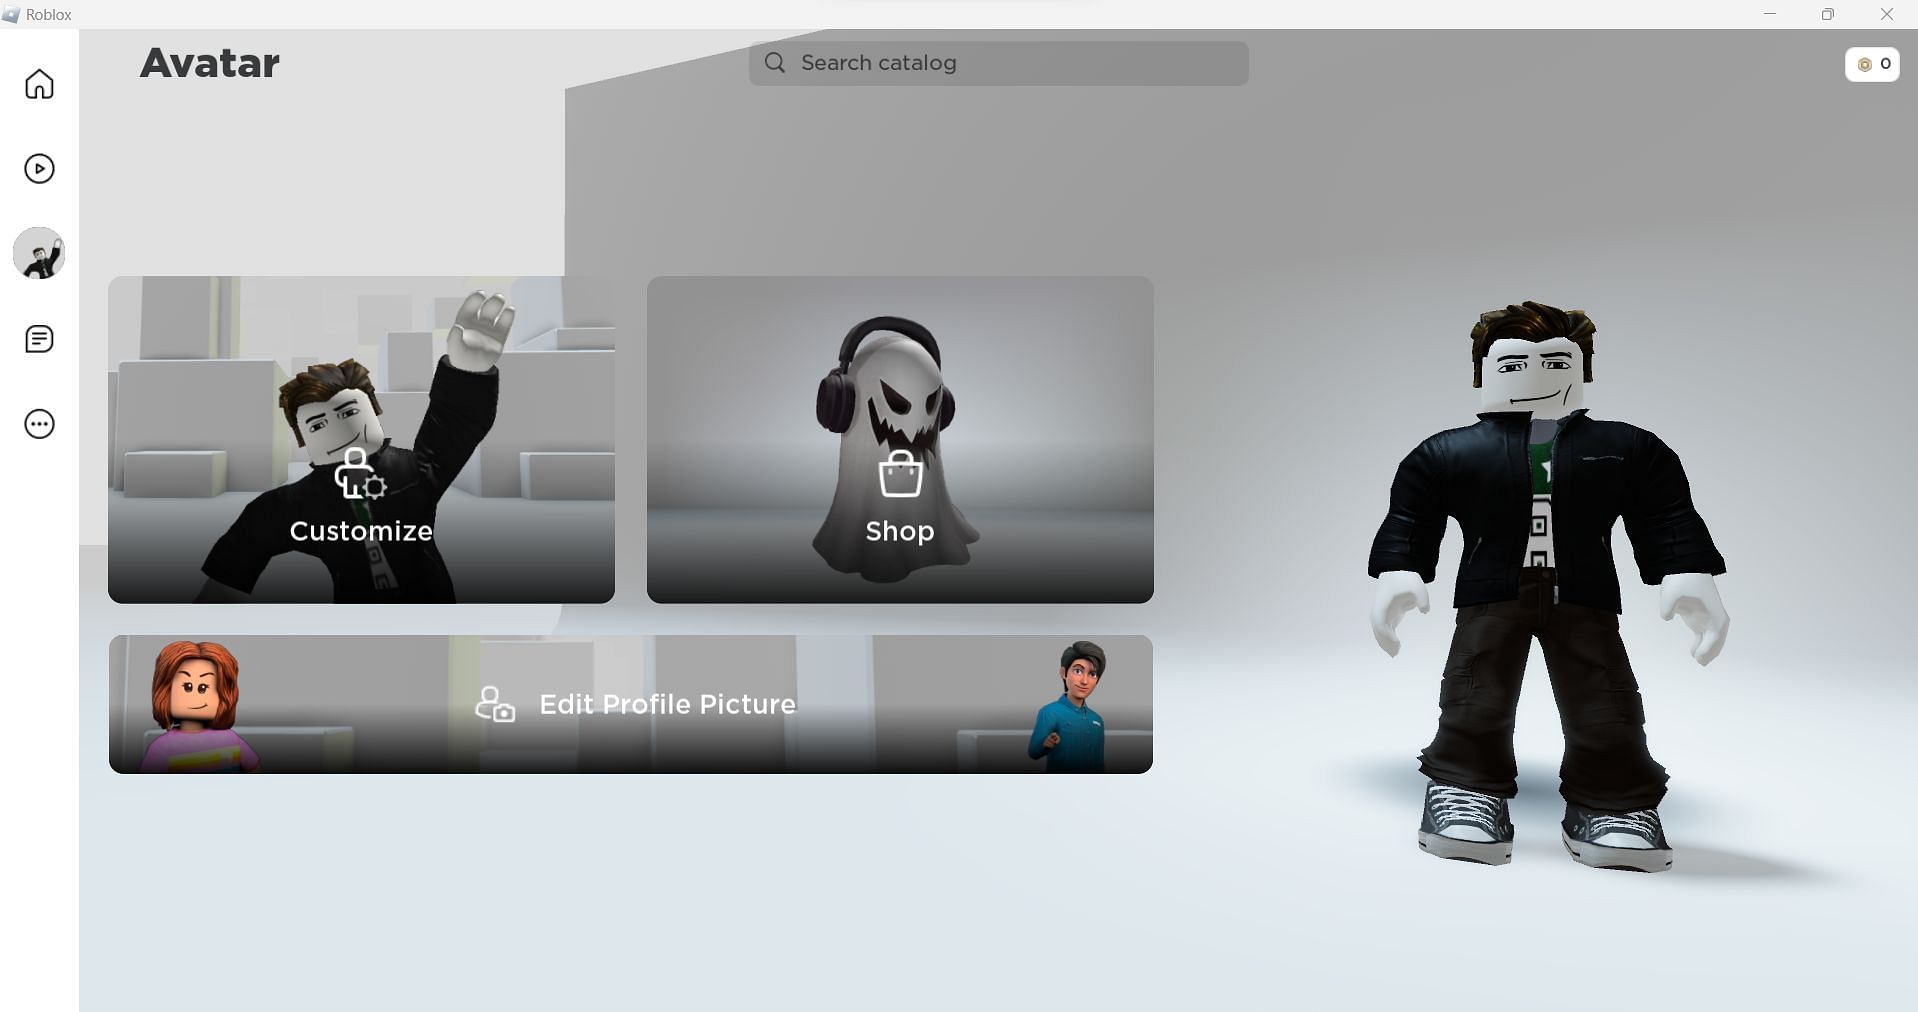 IEagle on X: To get a cool Photo to your avatar in Roblox like